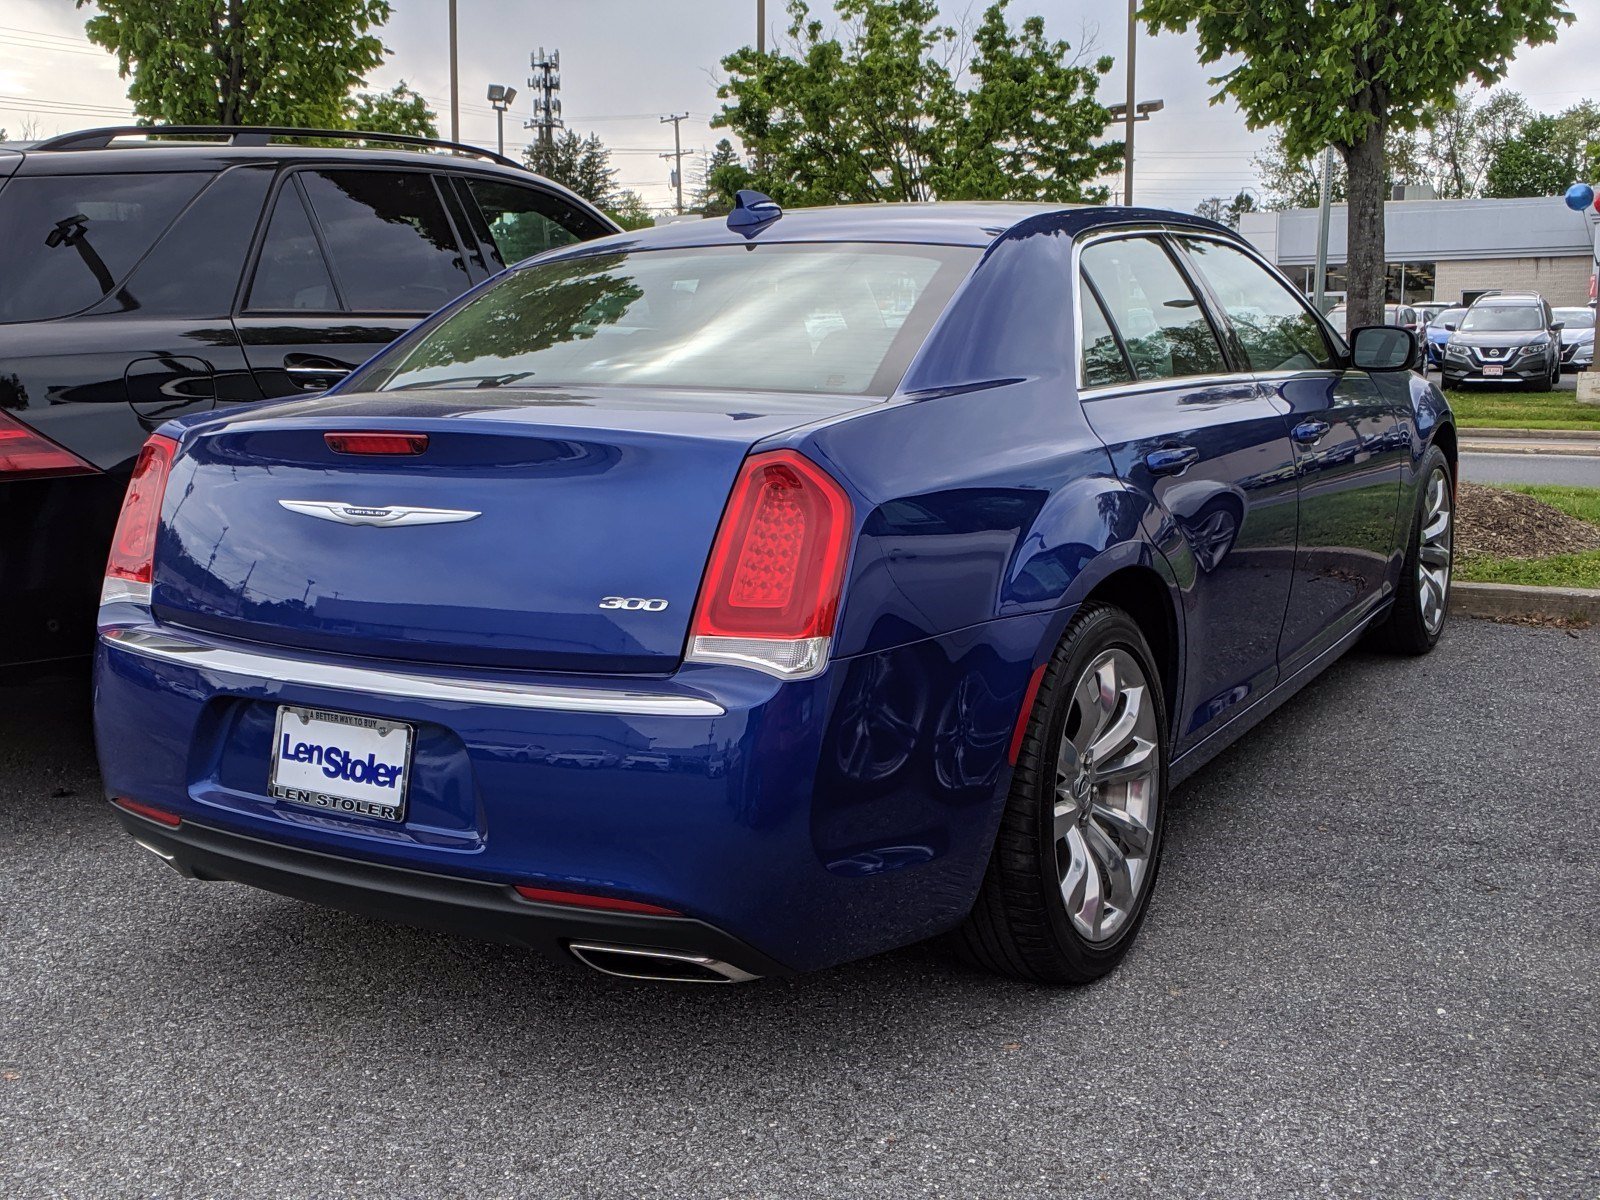 PreOwned 2019 Chrysler 300 Touring L RWD 4dr Car